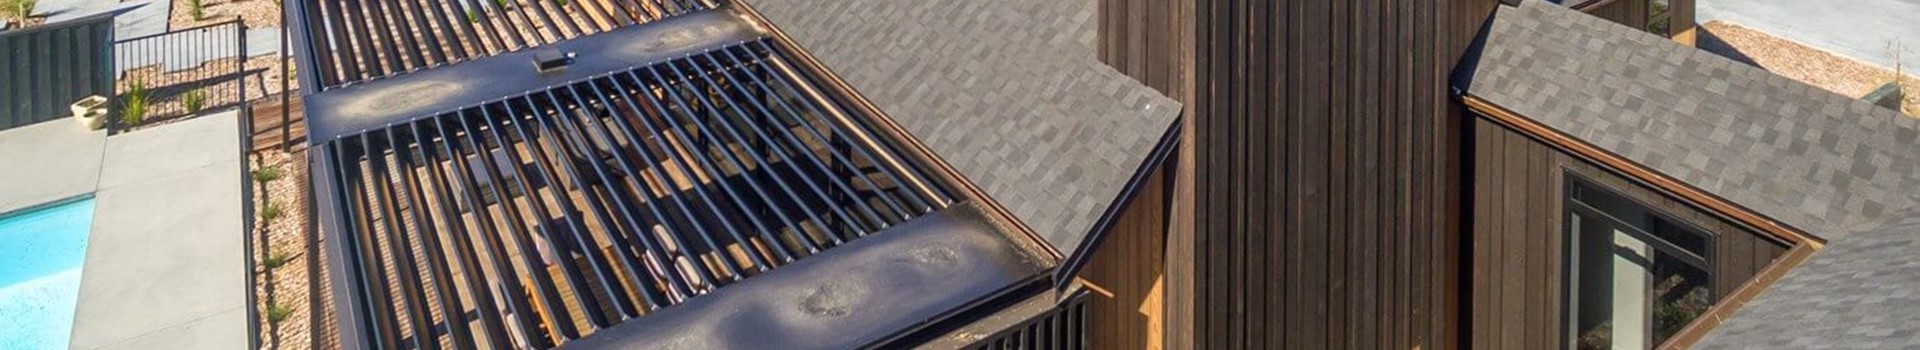 High-Performance Roof Systems for Safe Water Collection